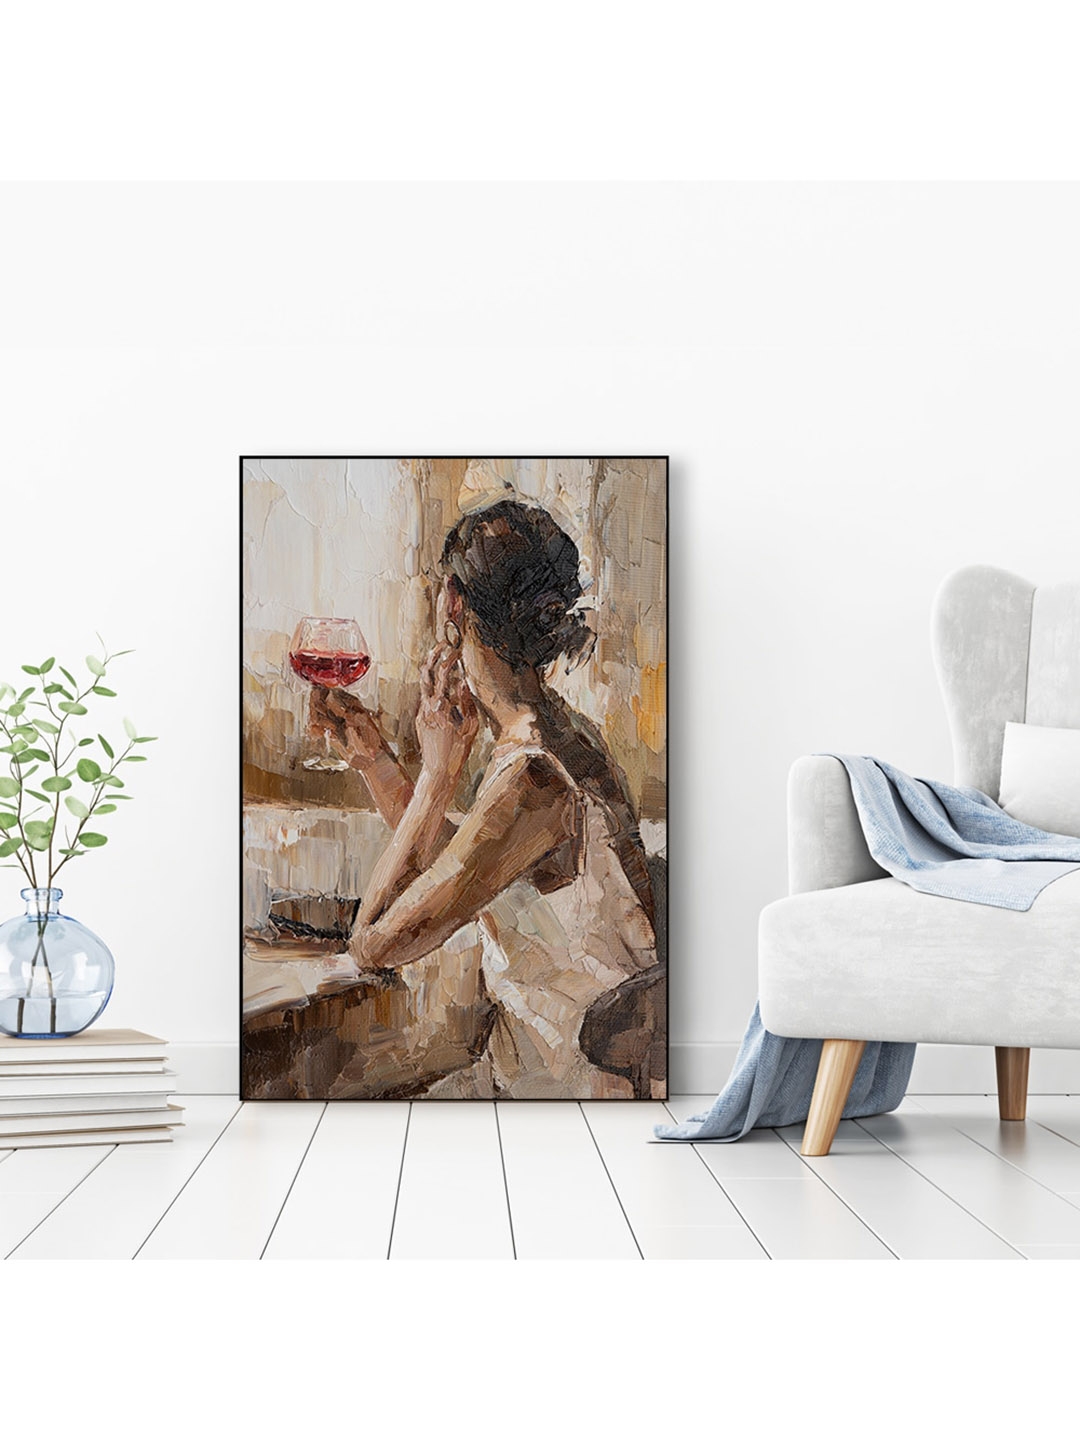 WALLMANTRA Beige Lady With A Wine Glass Framed Canvas Wall Painting